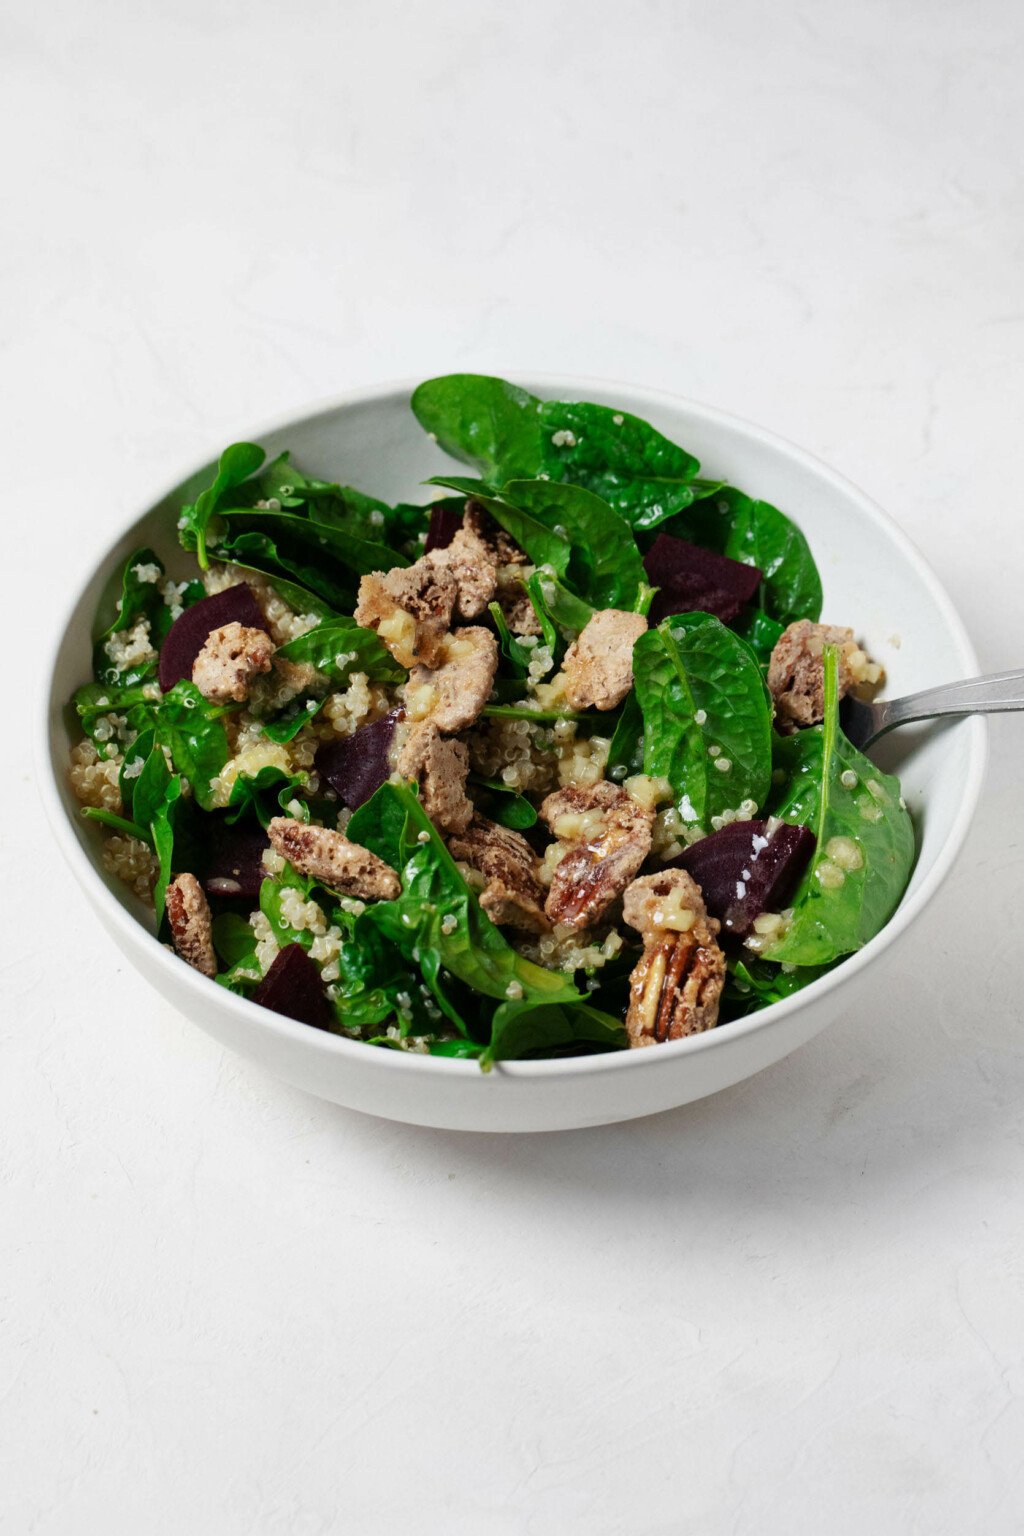 A white ceramic bowl has been filled with roasted beets, baby spinach leaves, quinoa, and candied nuts.